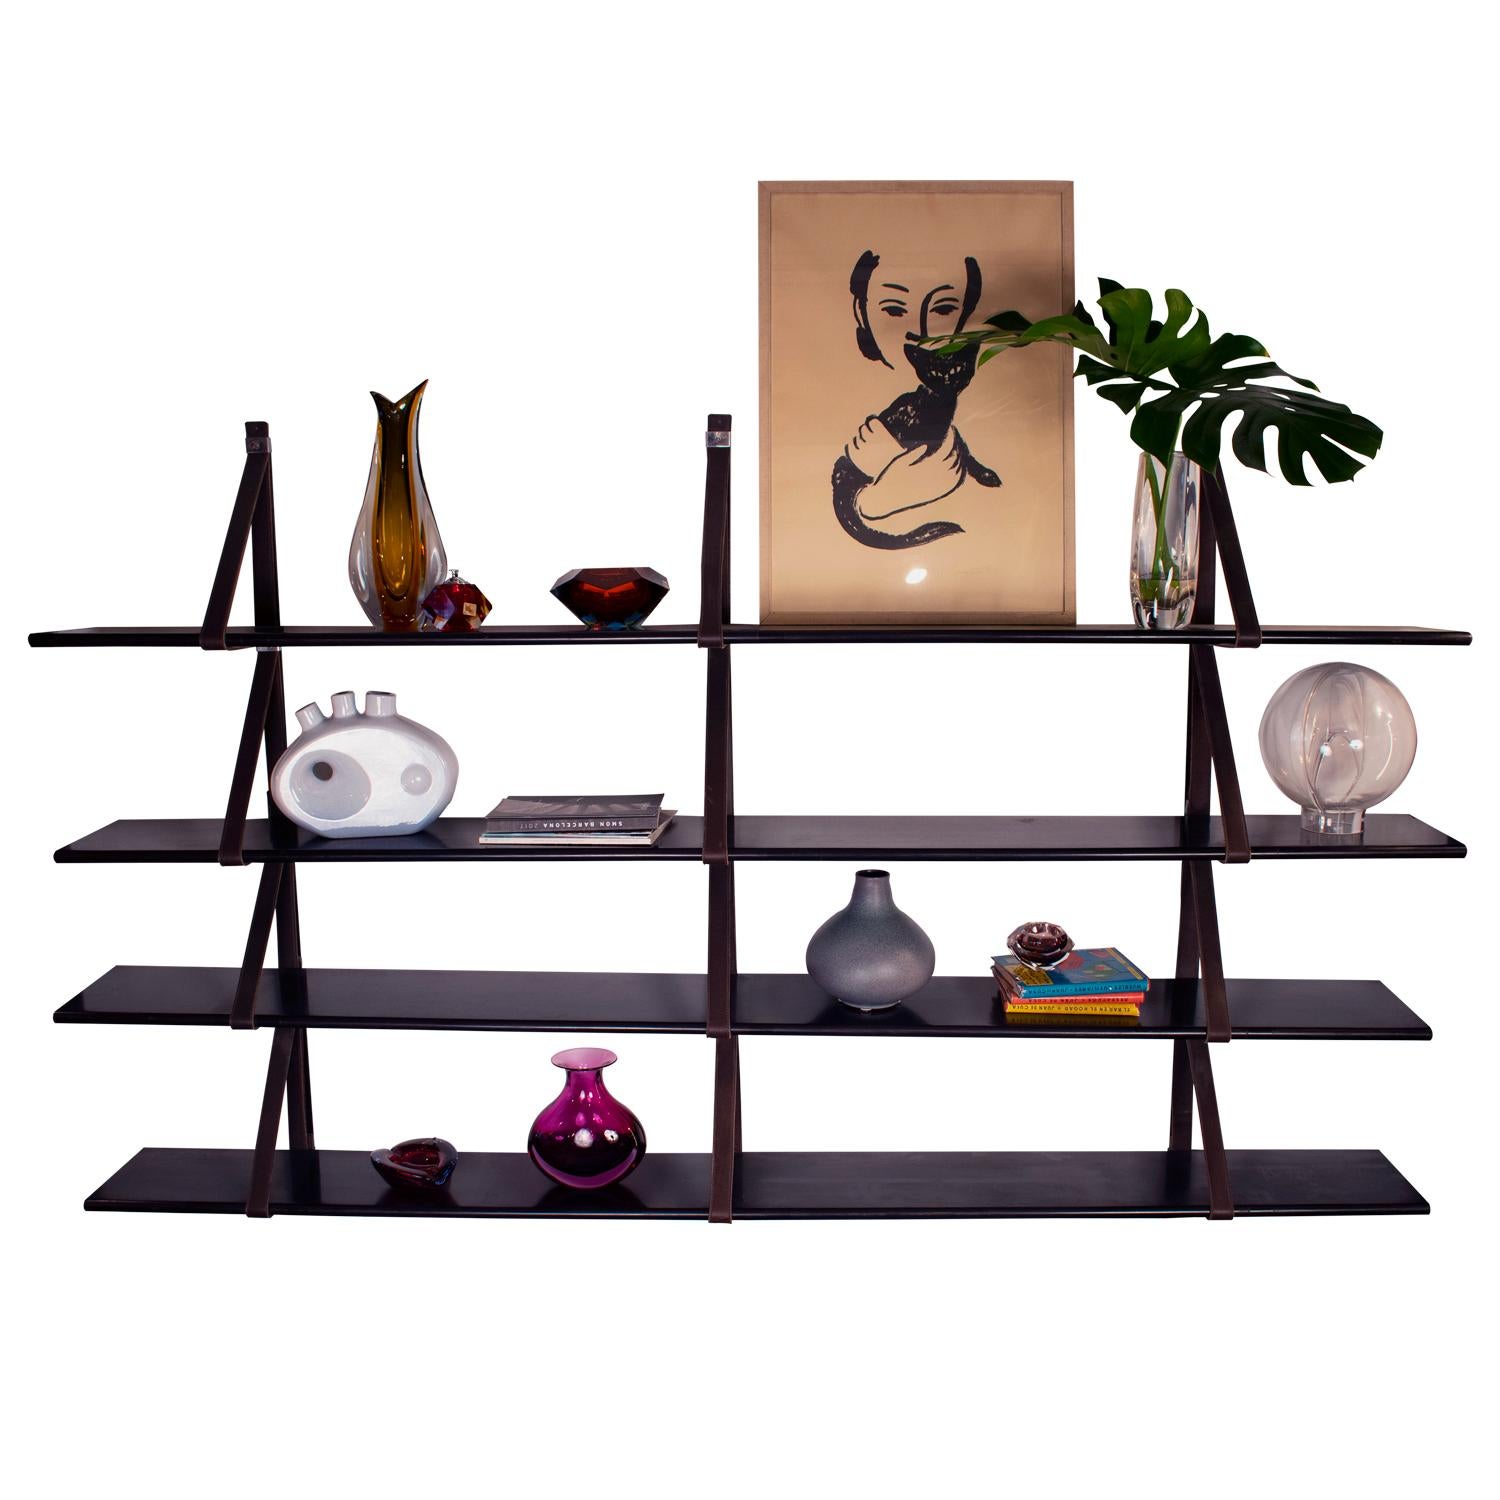 Mid-Century Modern MM Wall-Mounted Bookshelf Designed by Miguel Milá for Gres, 1962, Spain